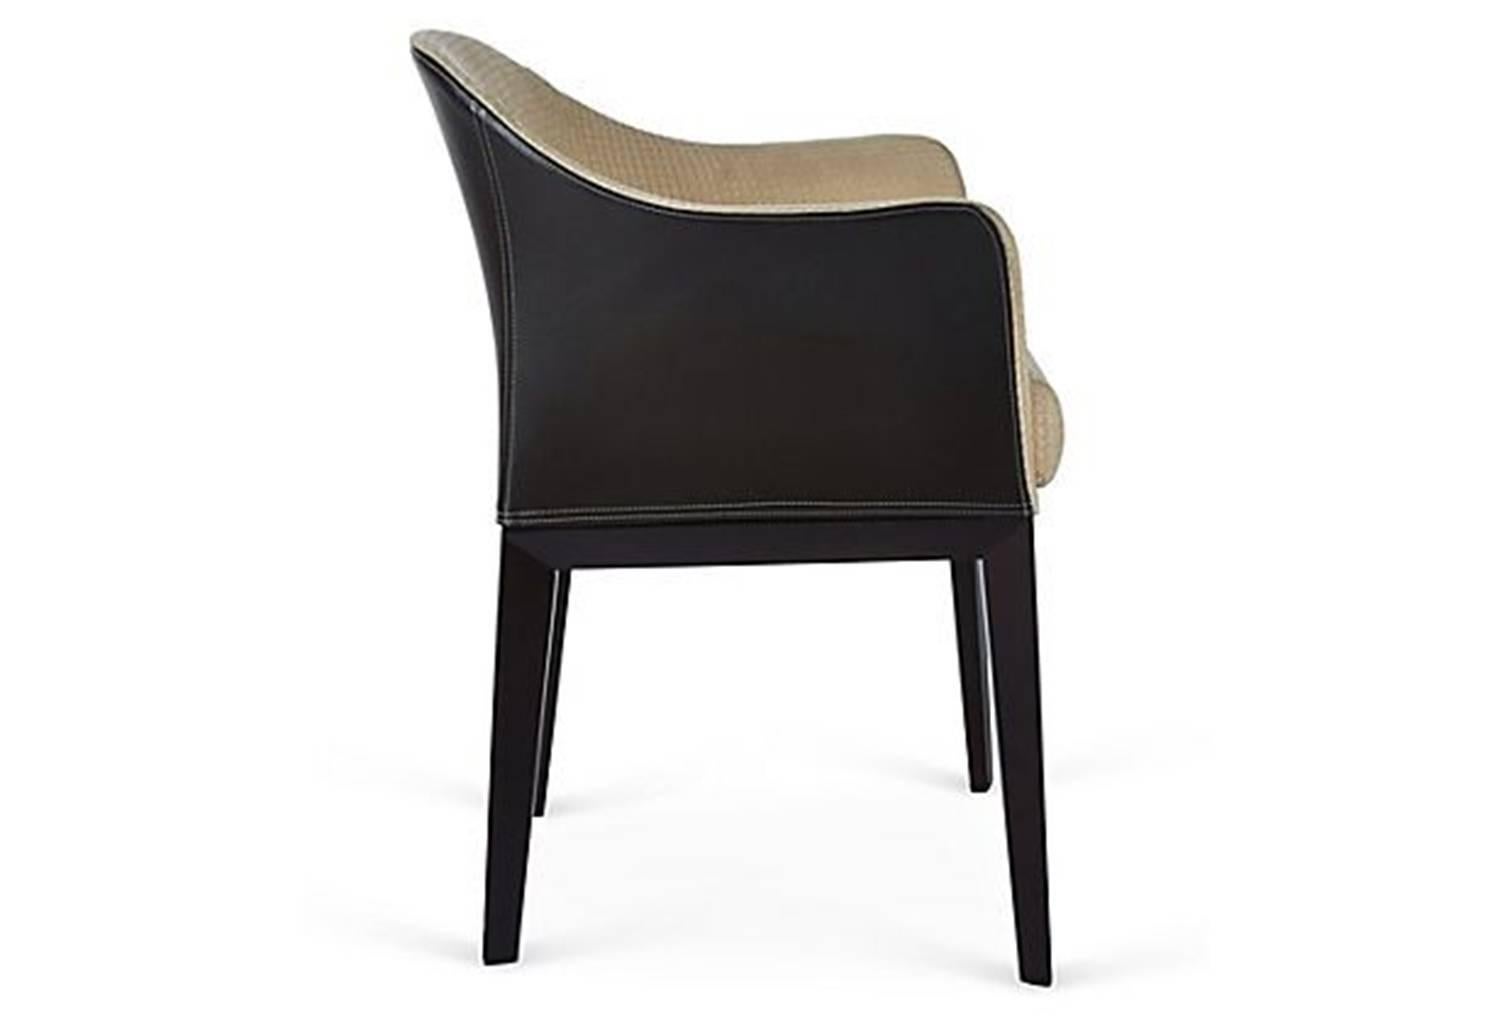 Giorgetti Normal armchair in combination of leather and fabric.